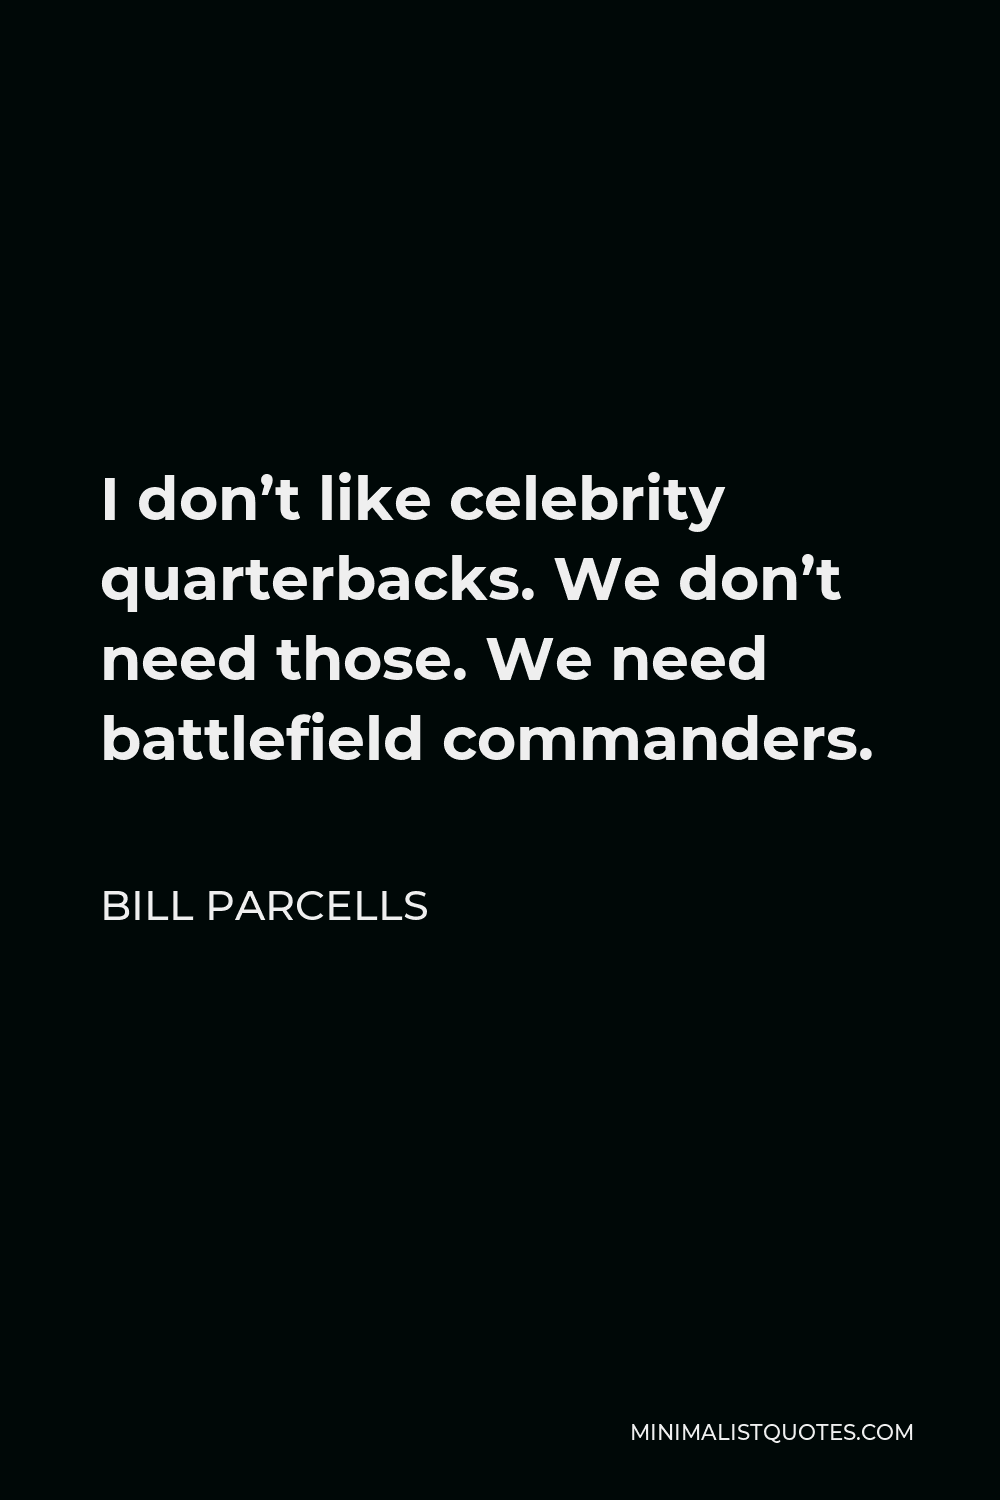 Bill Parcells Quote - I don’t like celebrity quarterbacks. We don’t need those. We need battlefield commanders.